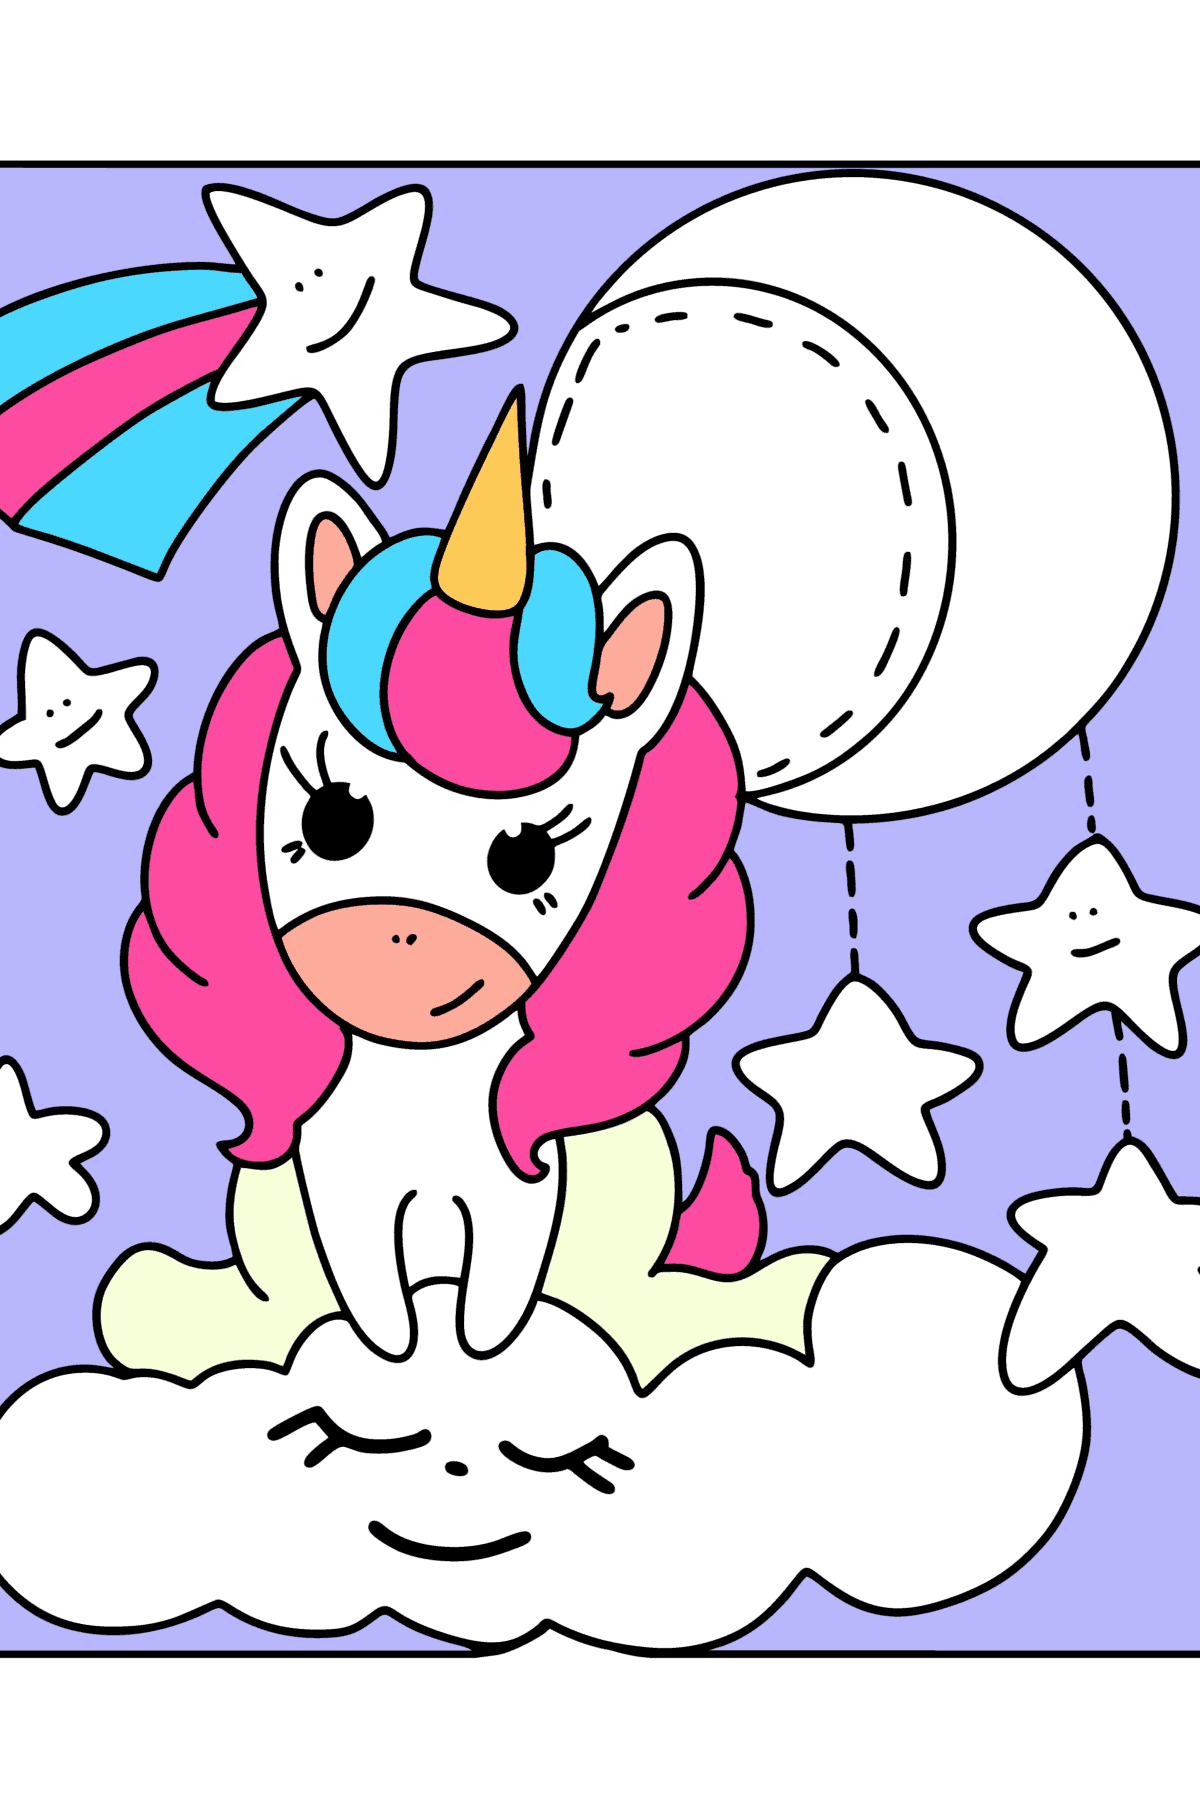 Moon unicorn coloring page - Coloring Pages for Kids